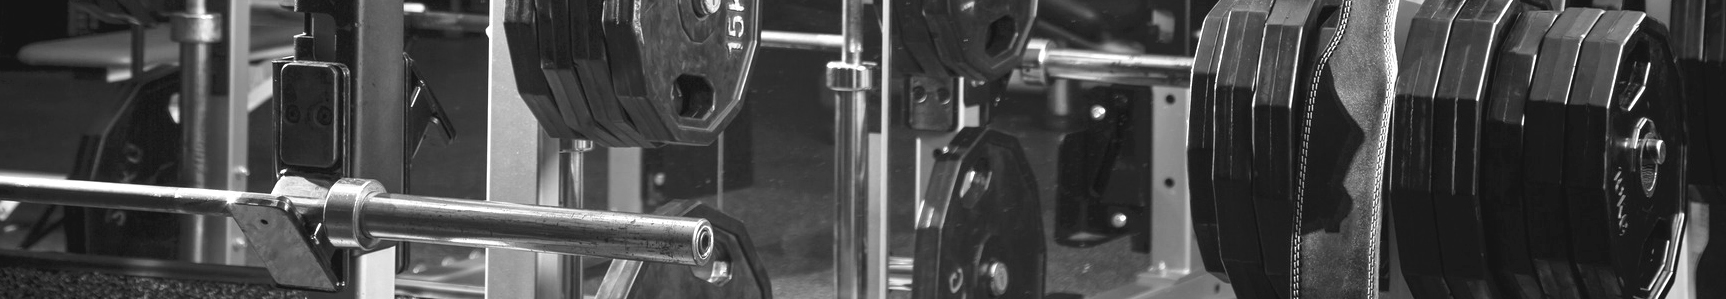 Weight lifting equipment in a club gym.